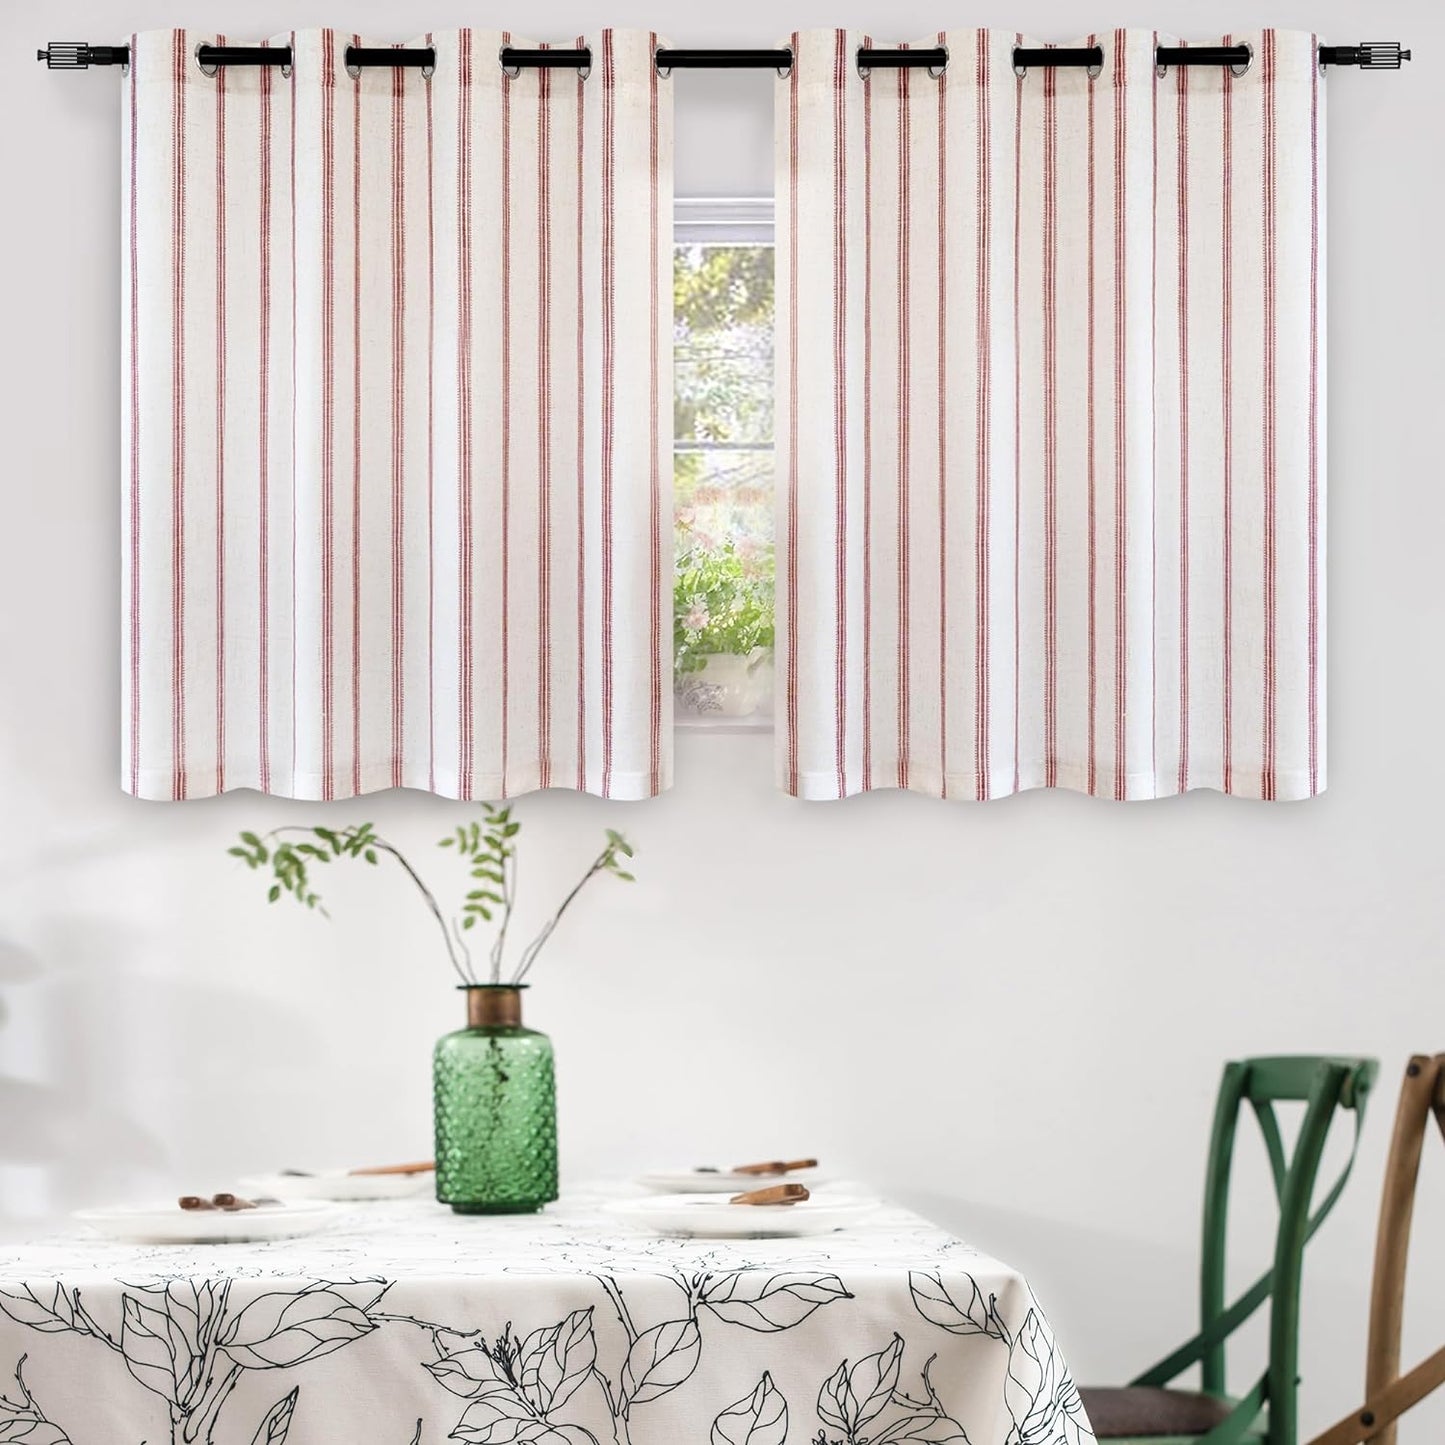 Driftaway Farmhouse Linen Blend Blackout Curtains 84 Inches Long for Bedroom Vertical Striped Printed Linen Curtains Thermal Insulated Grommet Lined Treatments for Living Room 2 Panels W52 X L84 Grey  DriftAway Red 52"X36" 